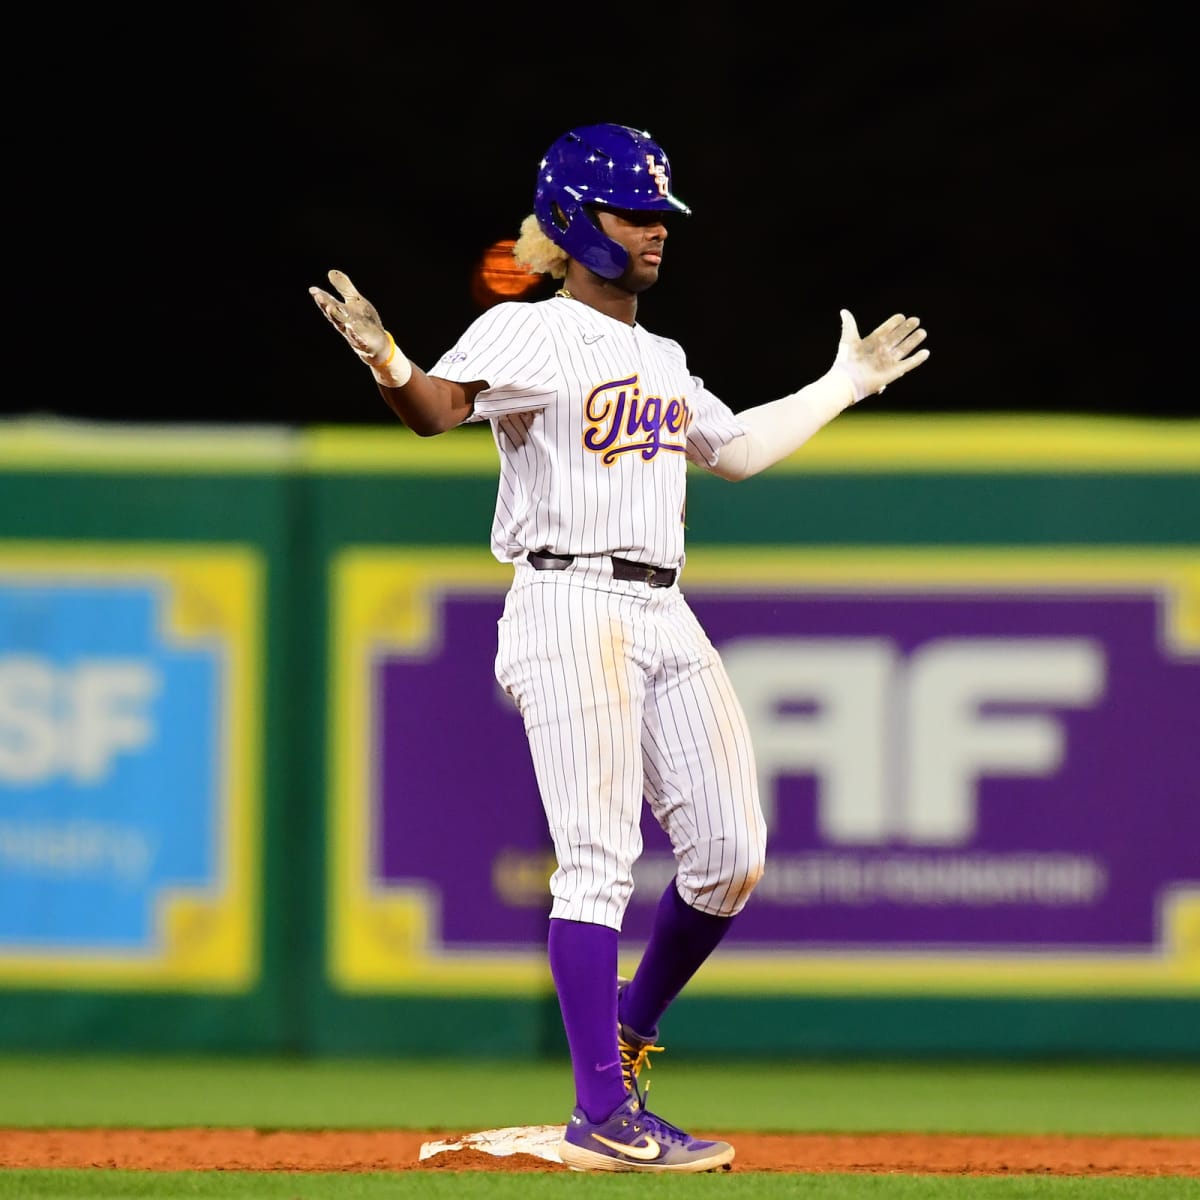 Late Game Blunders Lead to LSU Baseball's Demise in 7-6 Loss to